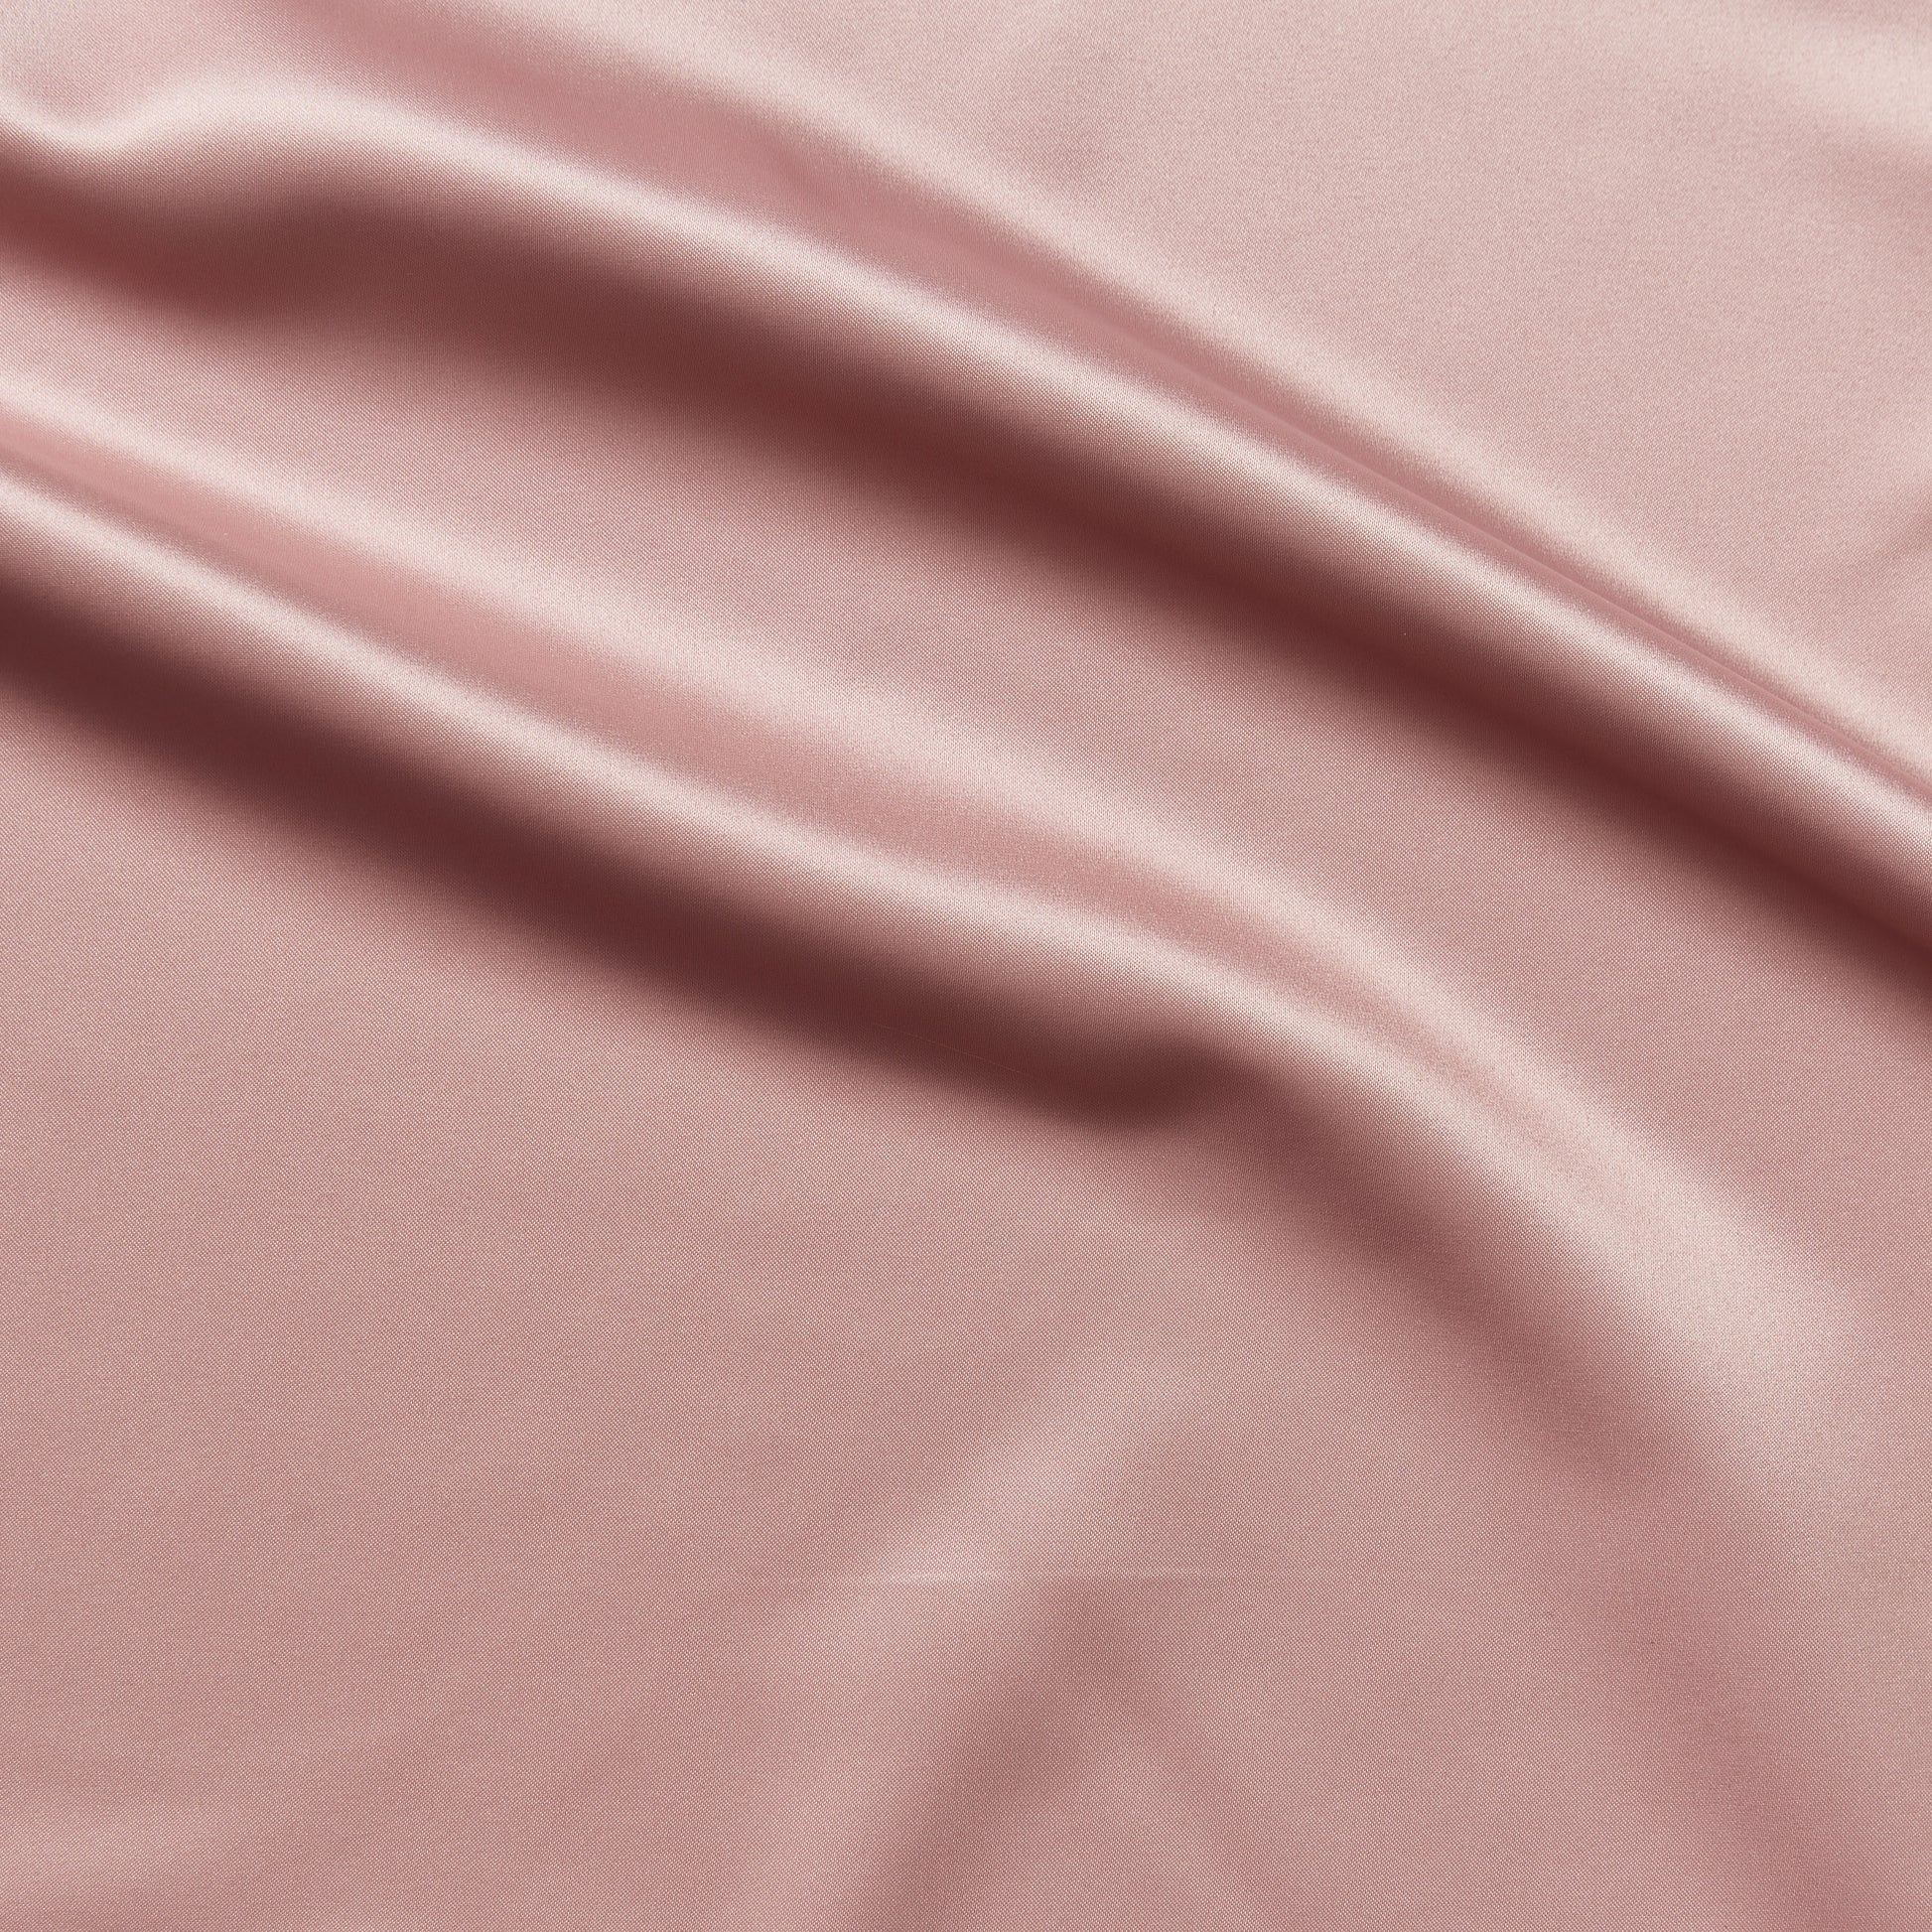 countess showing the antique color version of a crisp satin pure polyester fabric with moderate drape suitable for dresses